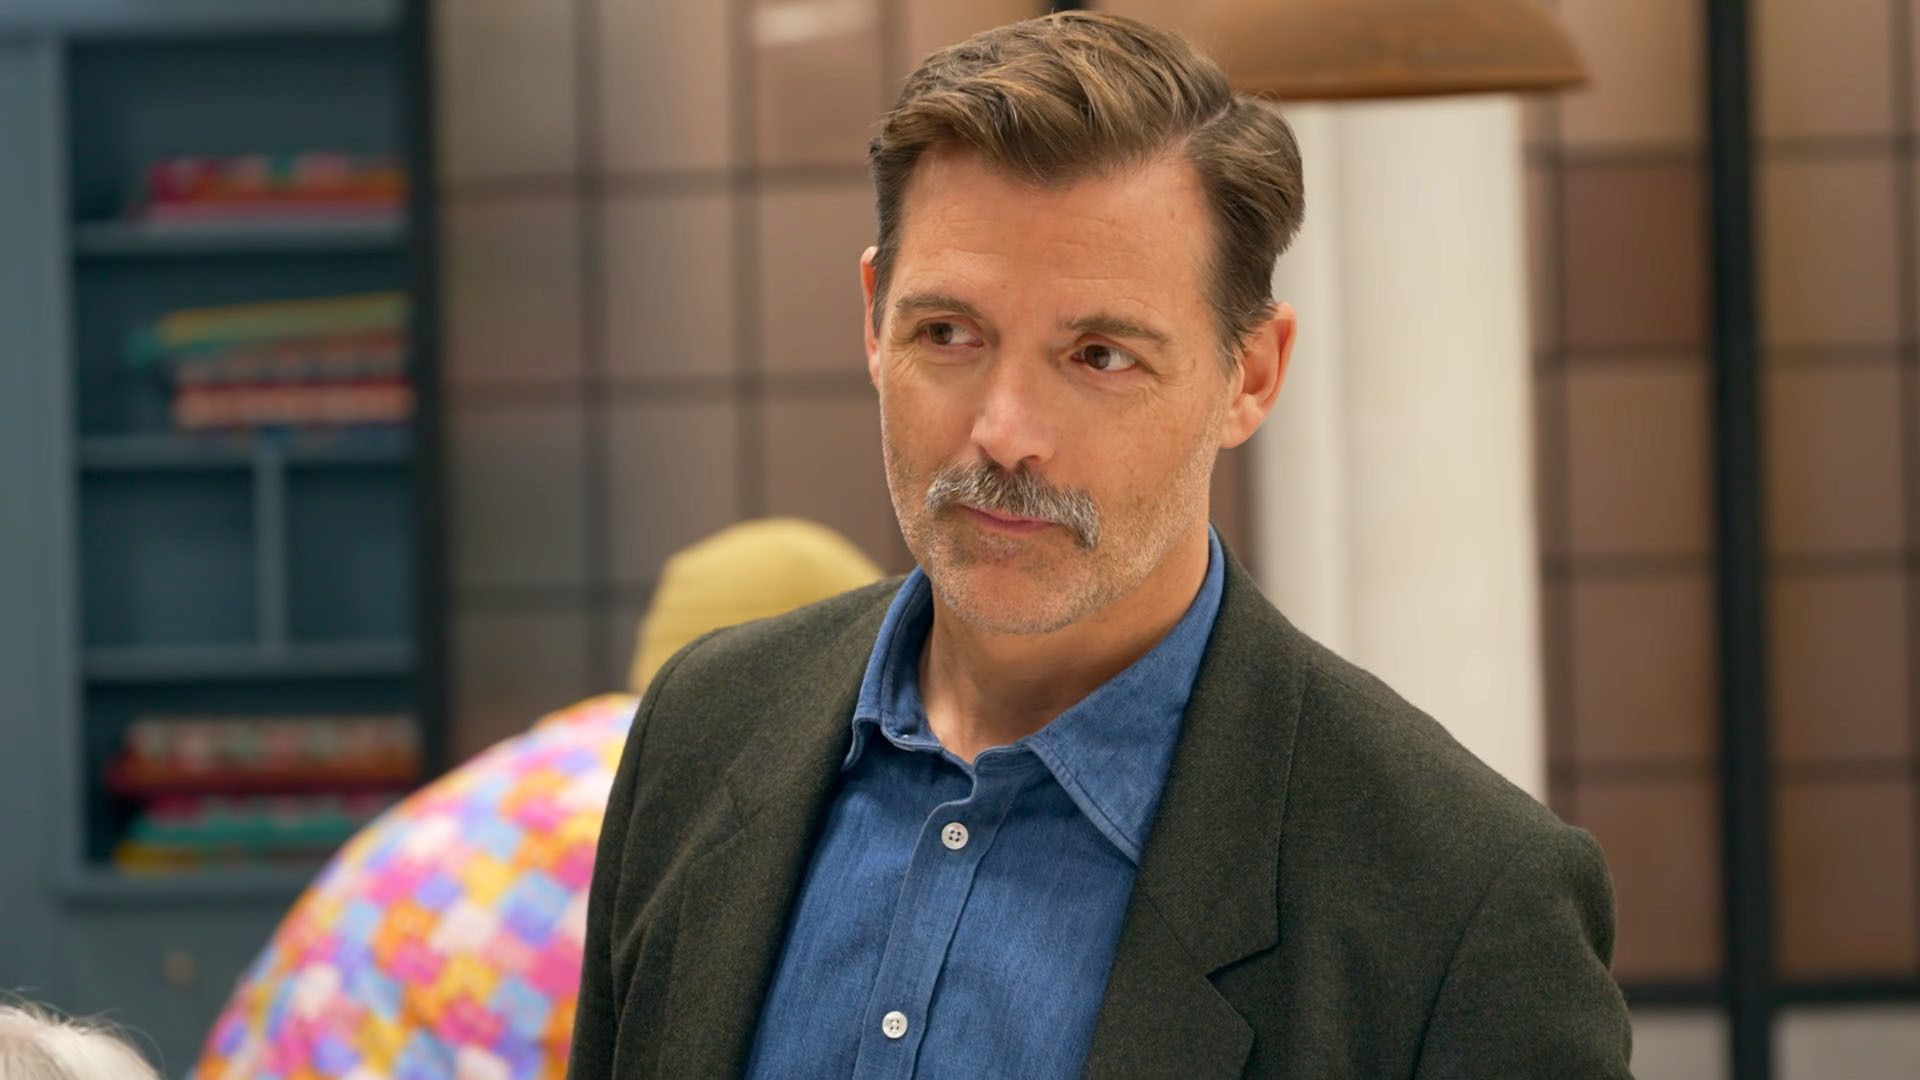 The Great British Sewing Bee's Patrick Grant made his acting debut in ...